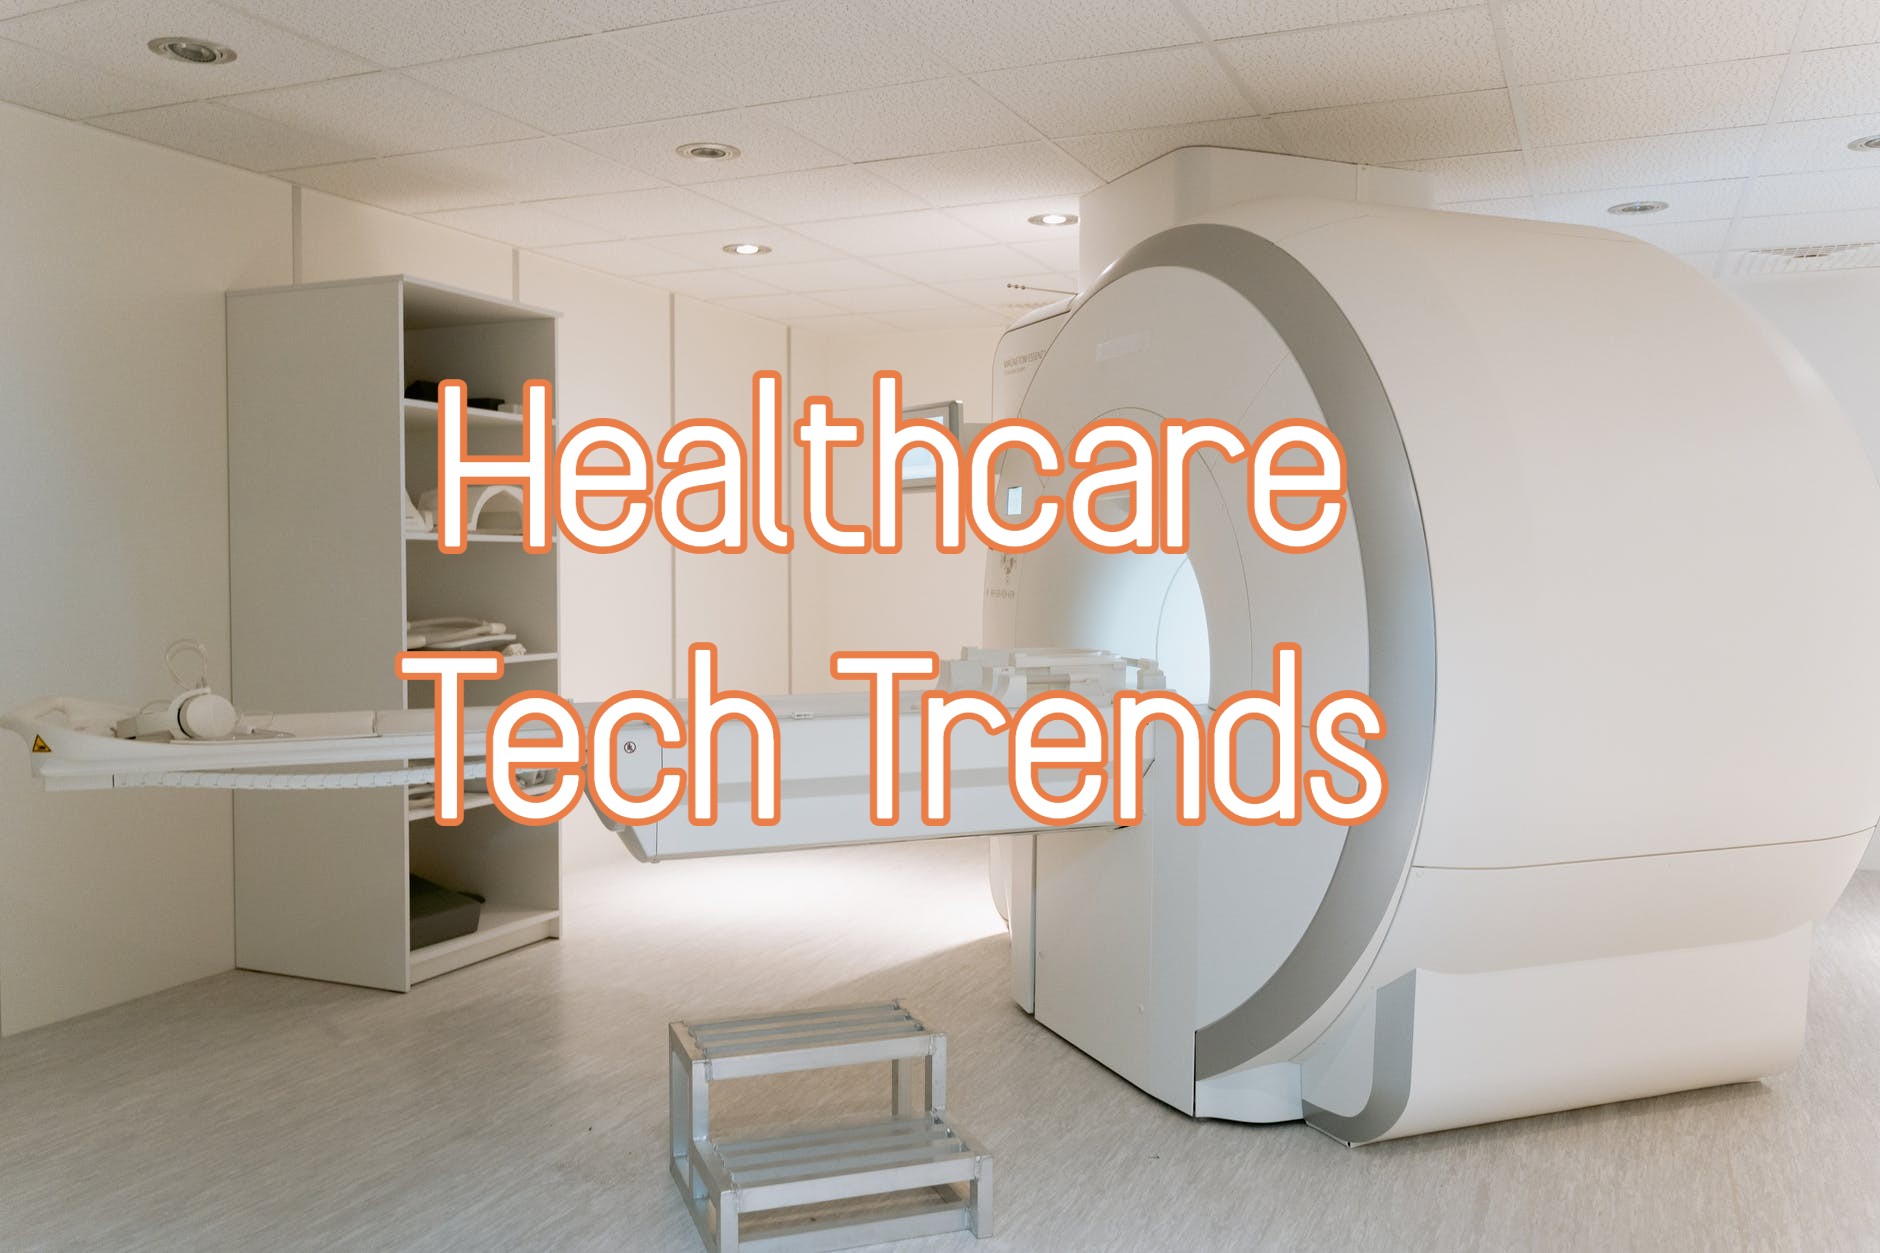 Major Tech Trends in The Healthcare to Watch for in 2021